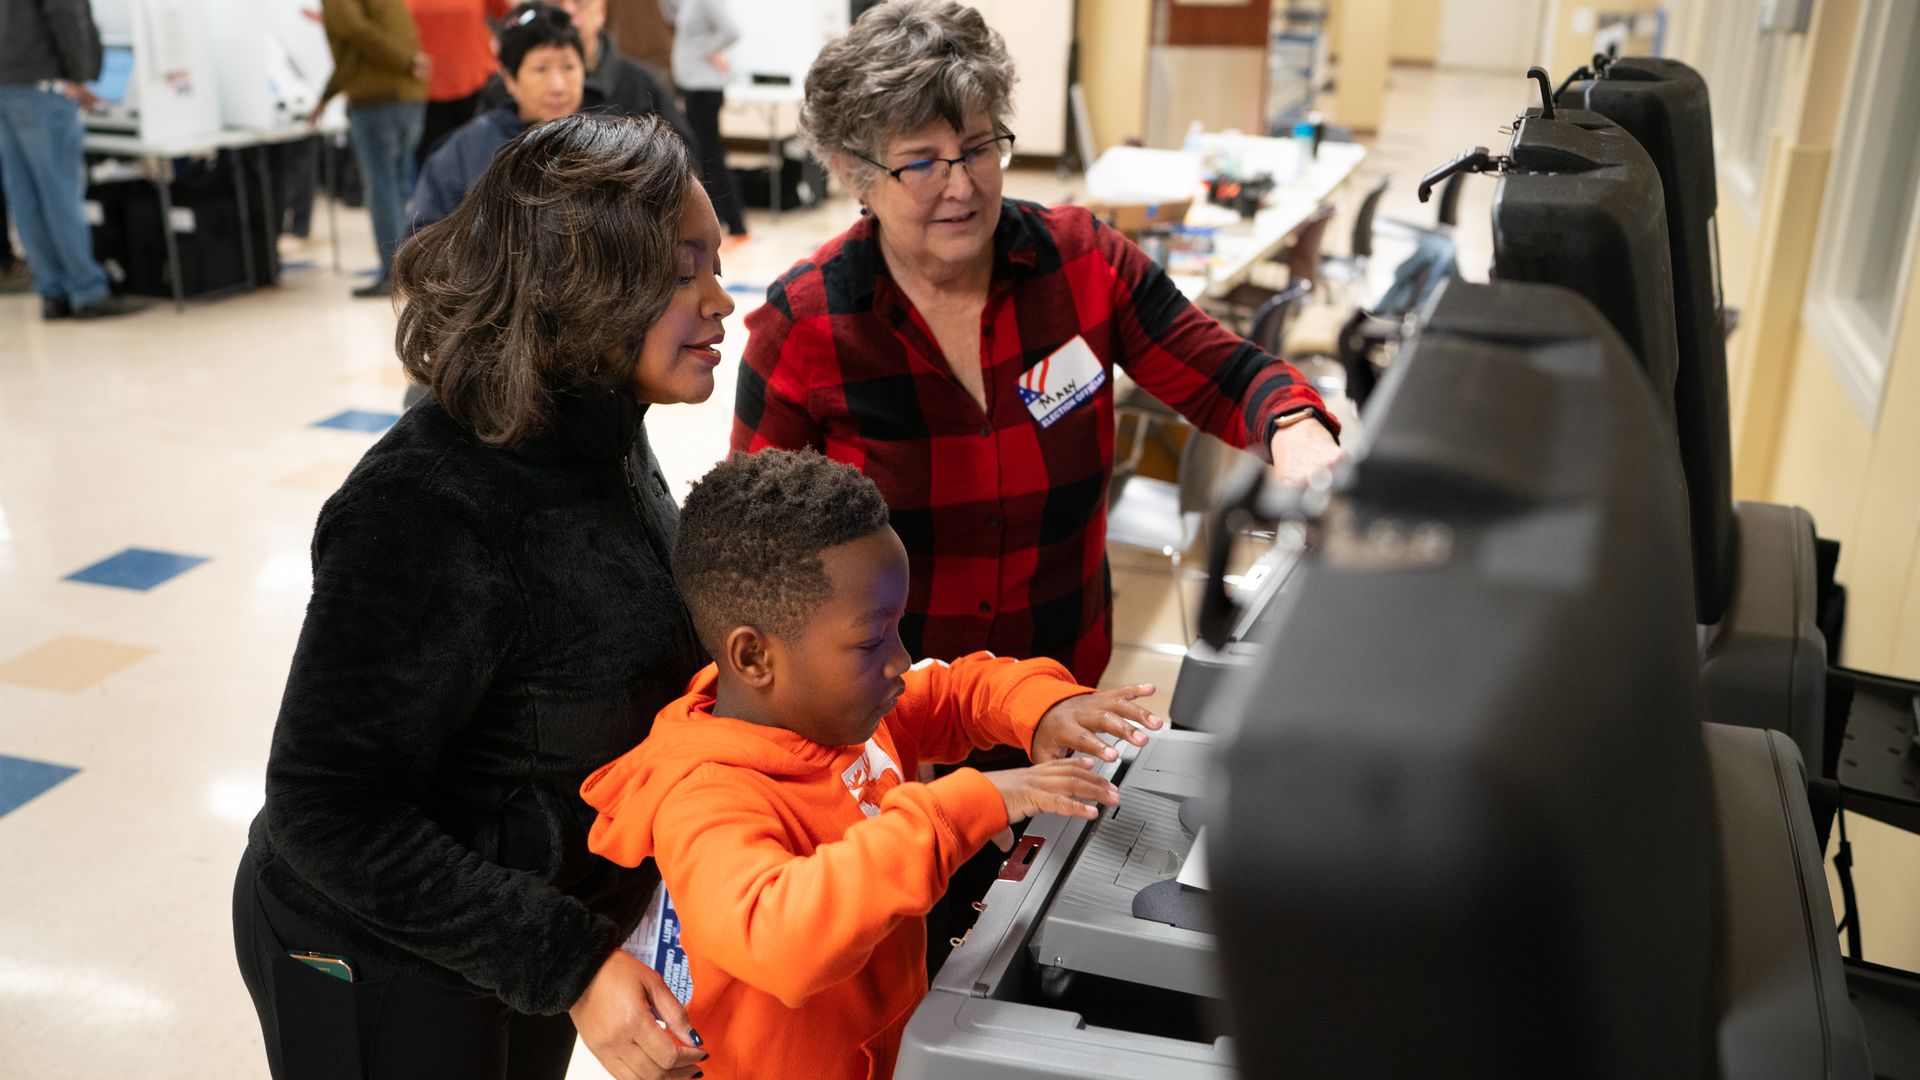 A poll worker helps a woman and child place a ballot into a ballot reader. 